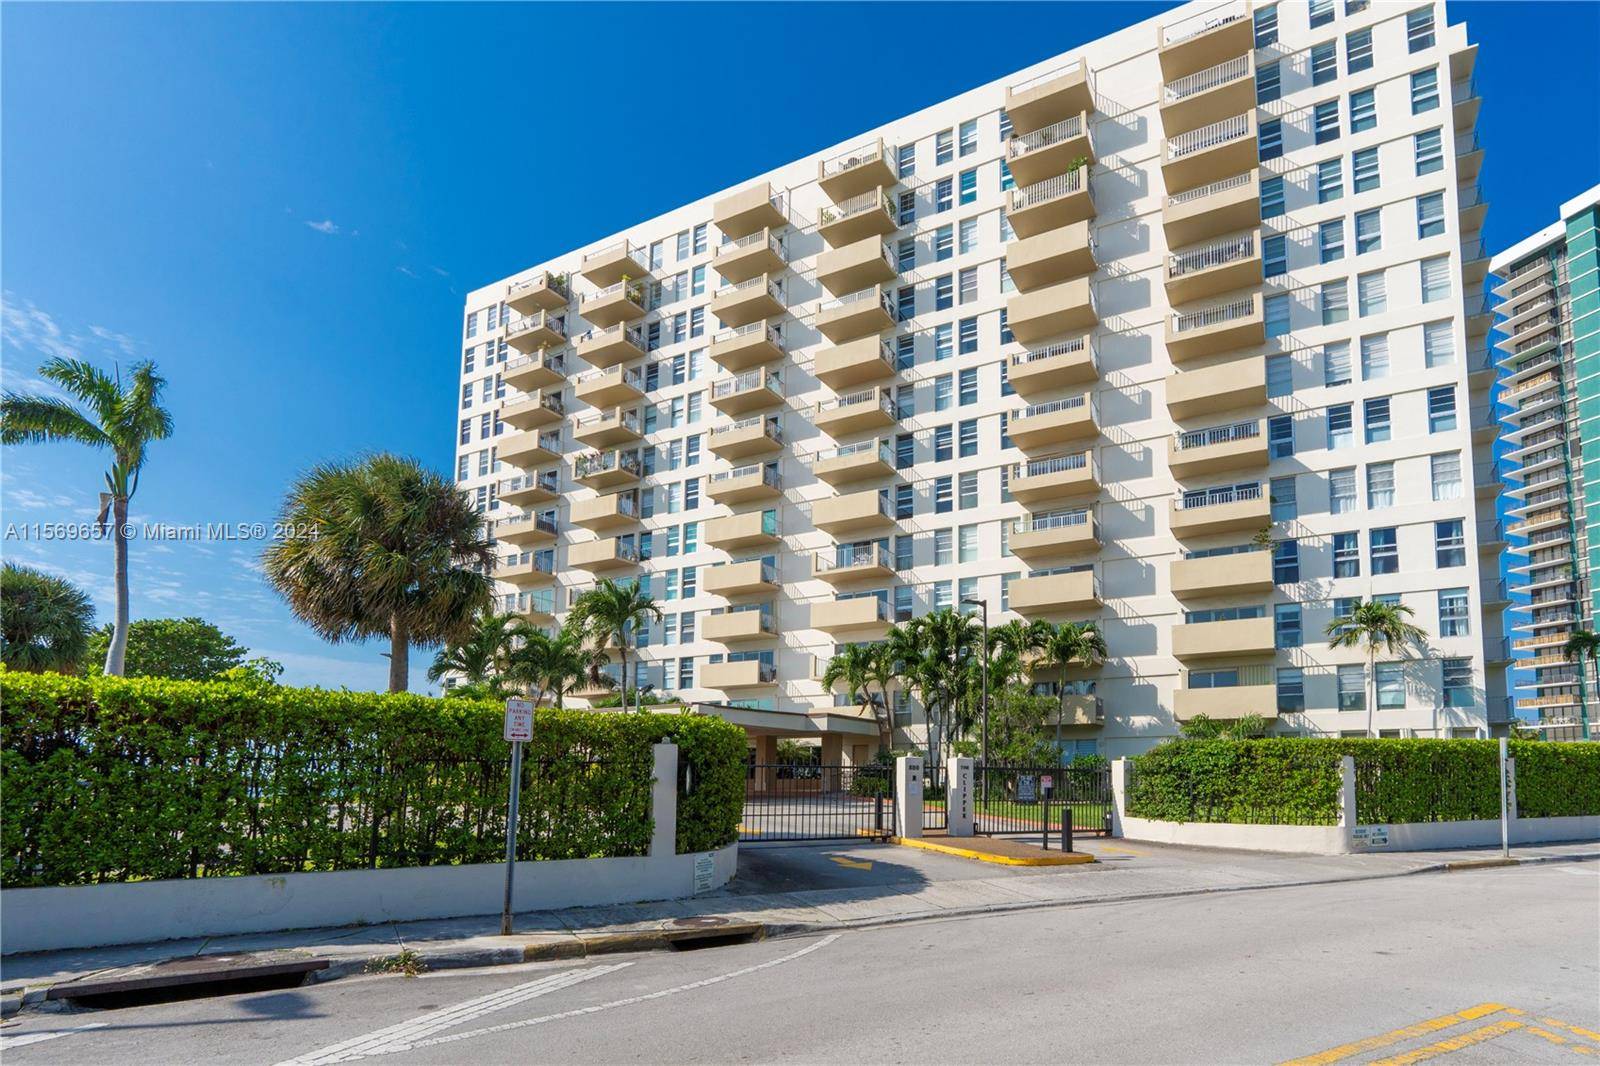 Condo in Historic Bayside Miami with amazing waterfront living and views.